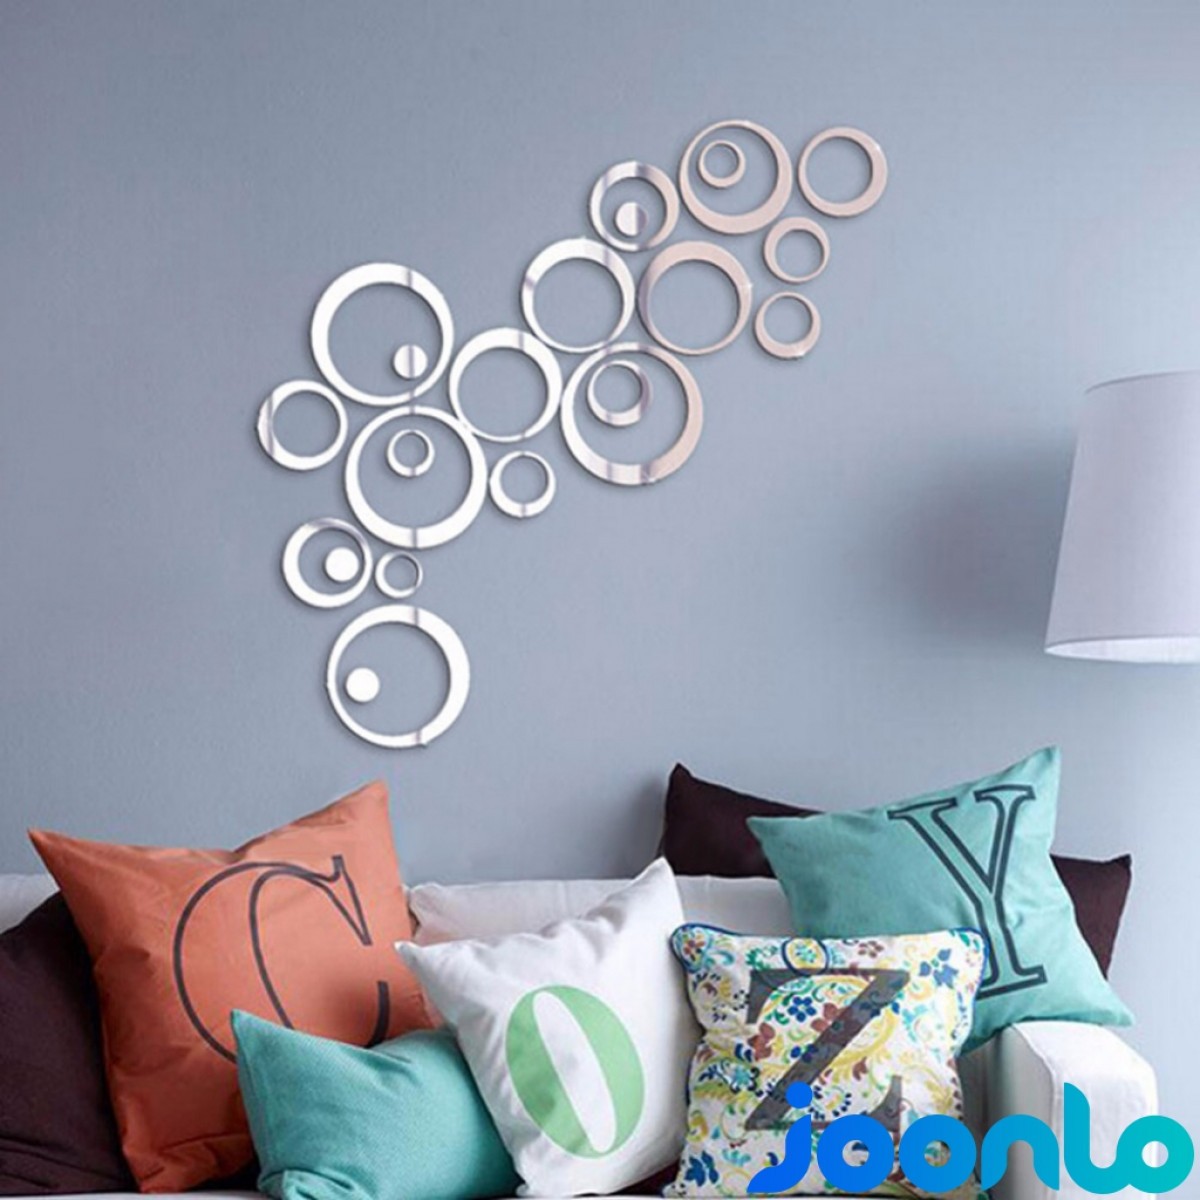 LSD Shining Silver Tone Acrylic 3D Mirror Effect Wall Sticker Round Circle Decal Mural Art Home Office Decor